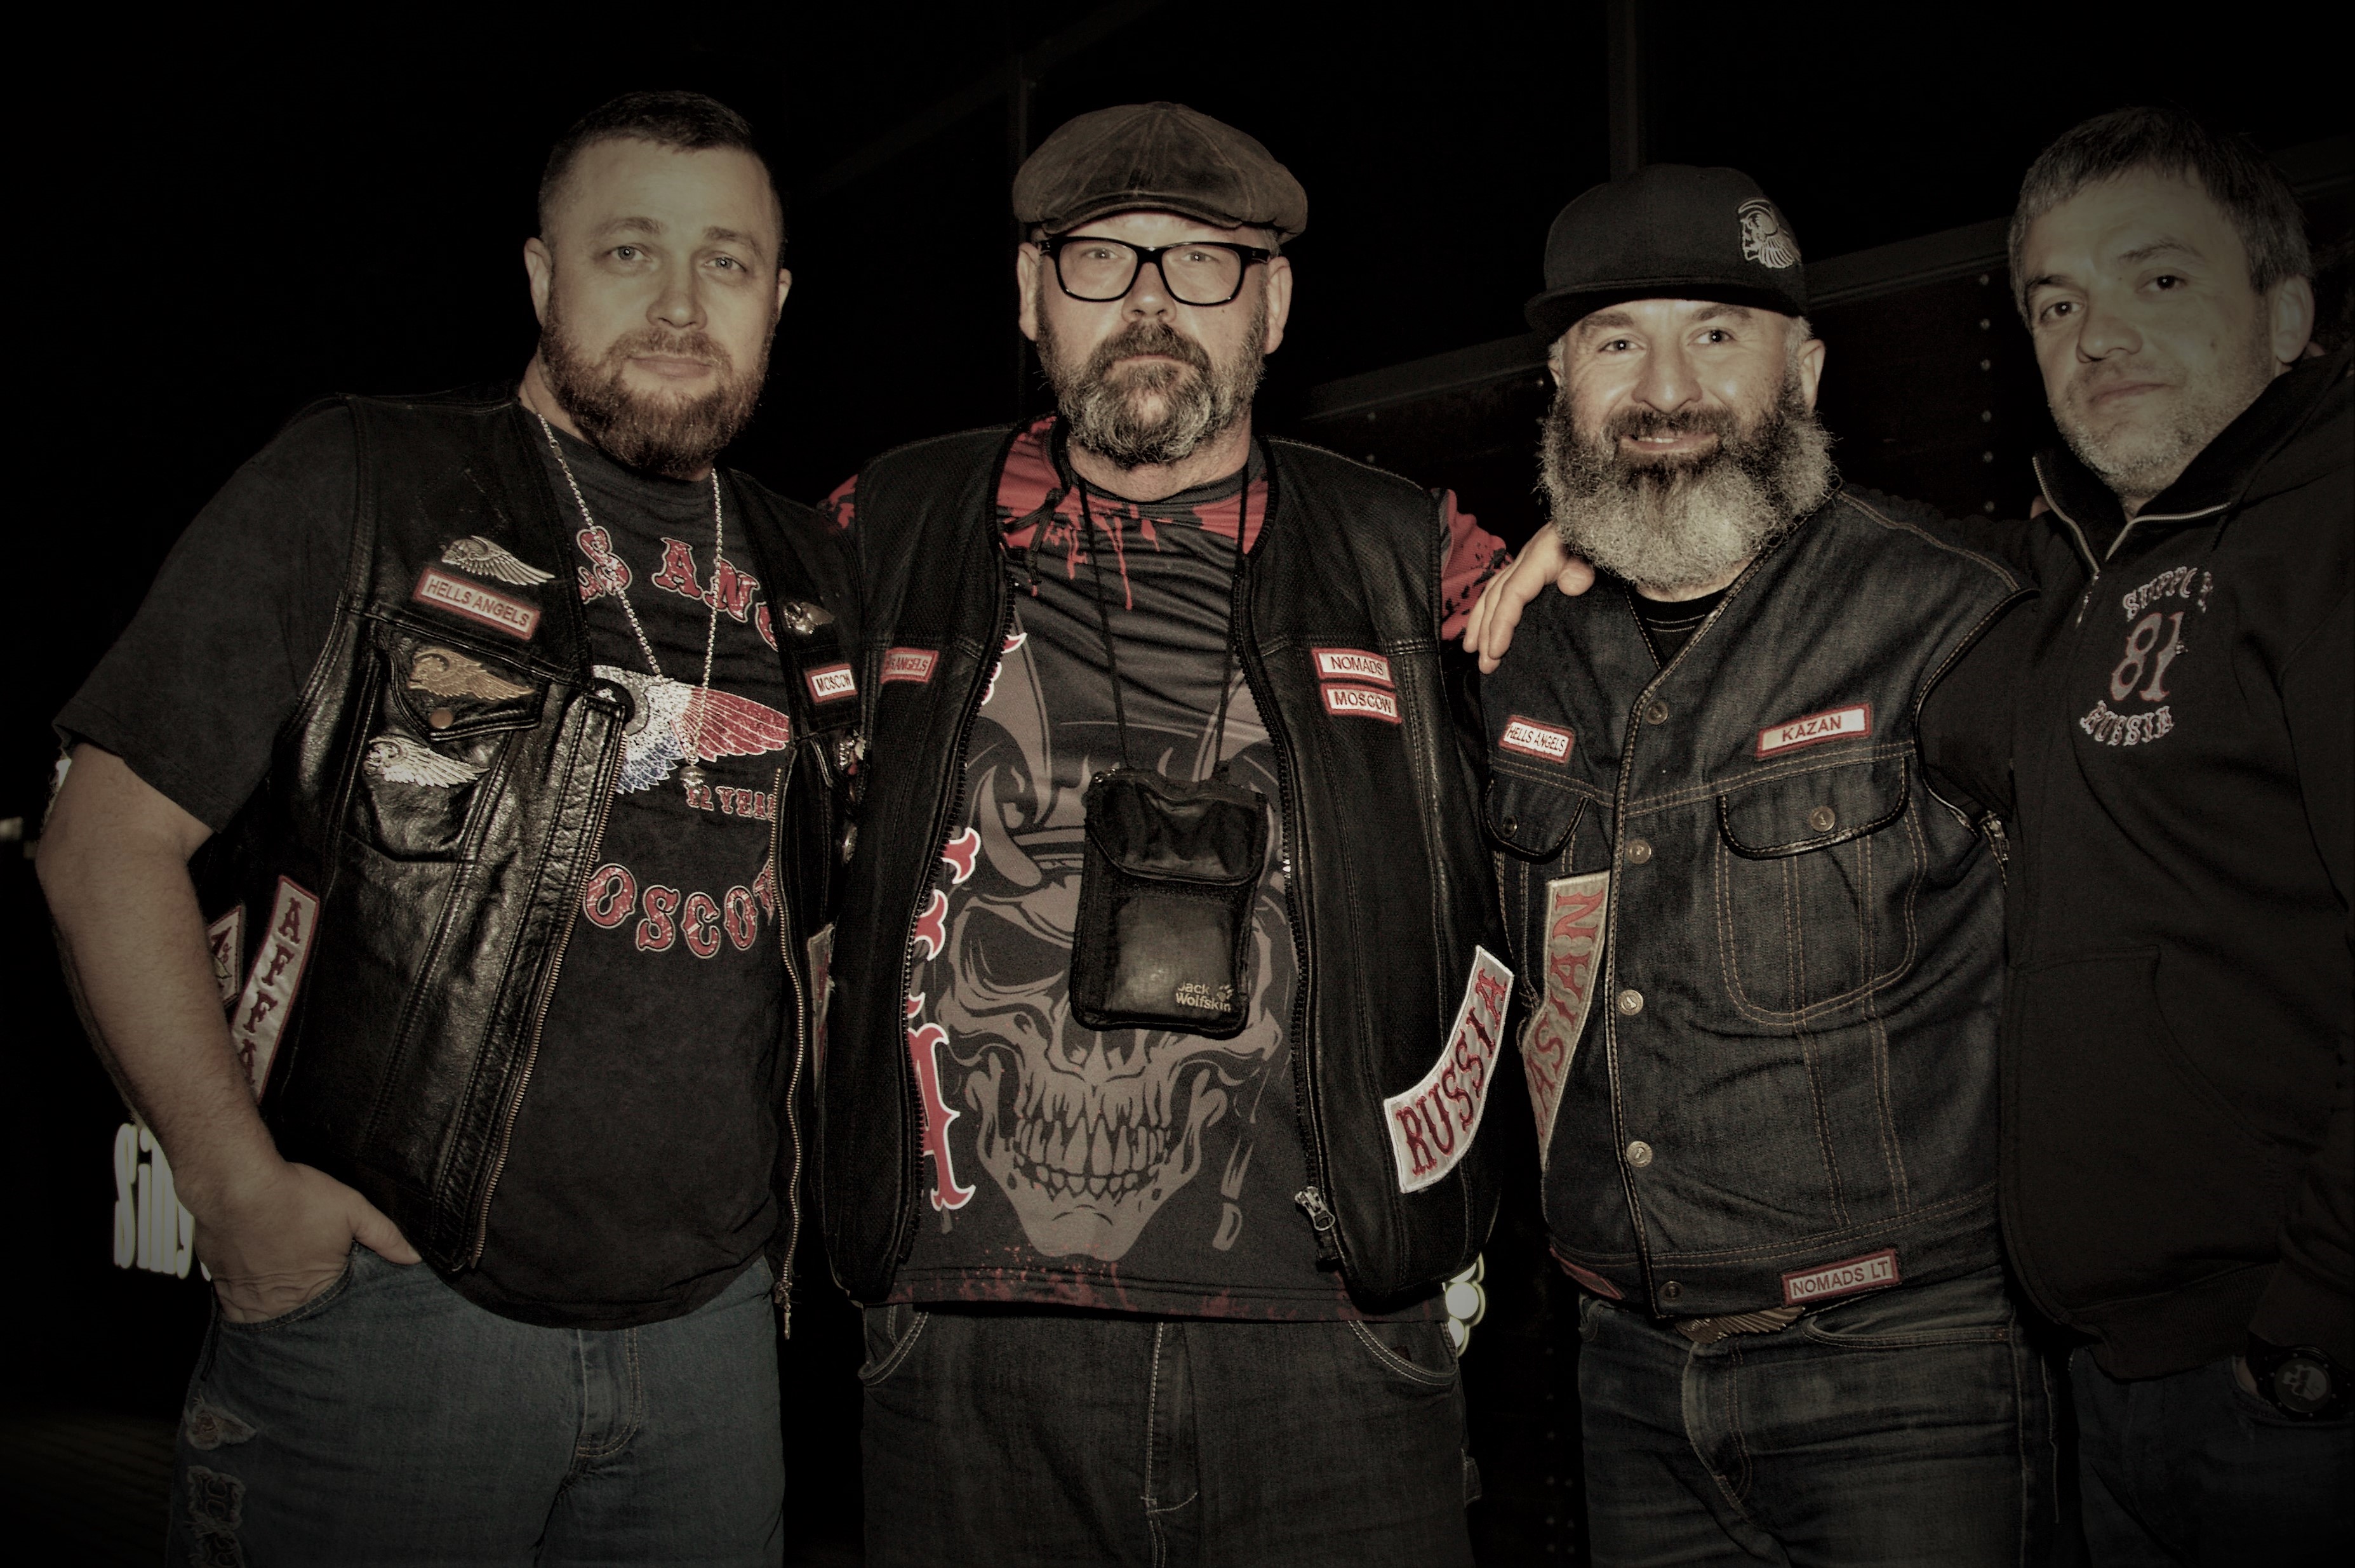 HELLS ANGELS MOSCOW 12 YEARS Hells Angels MC Moscow